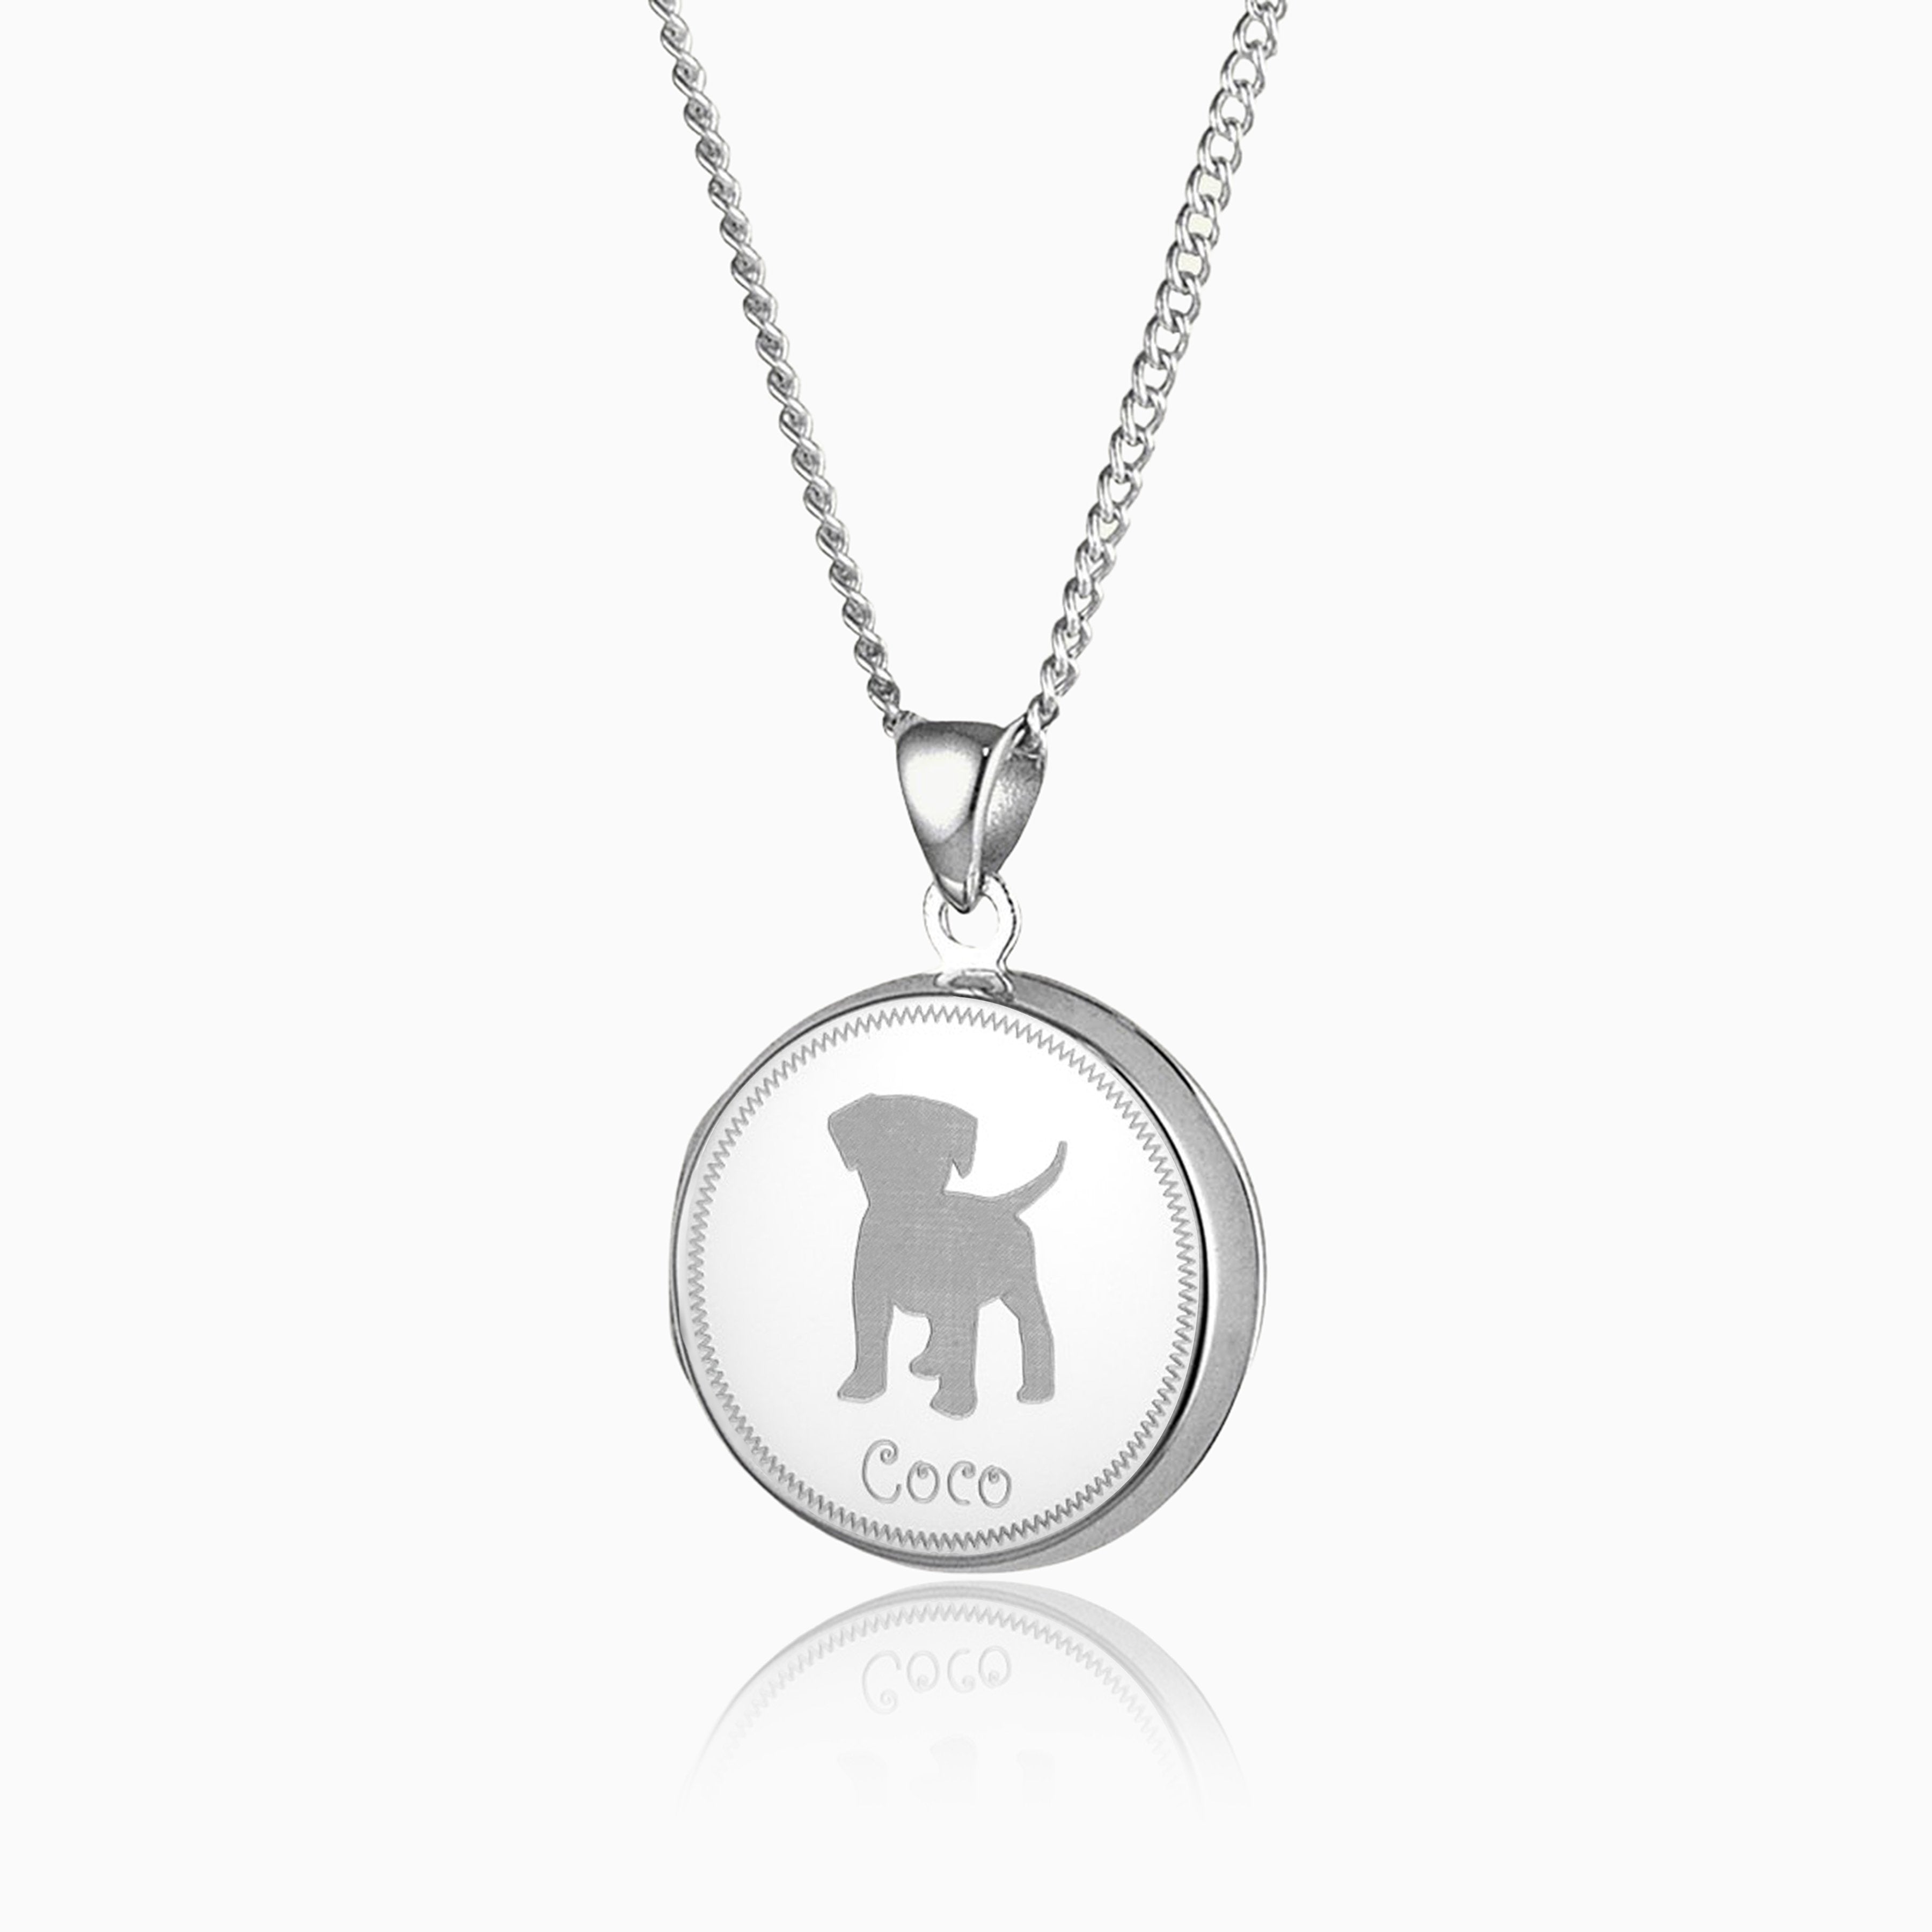 sterling silver round locket with a puppy engraved on the front and the name Coco underneath, on a sterling silver curb chain